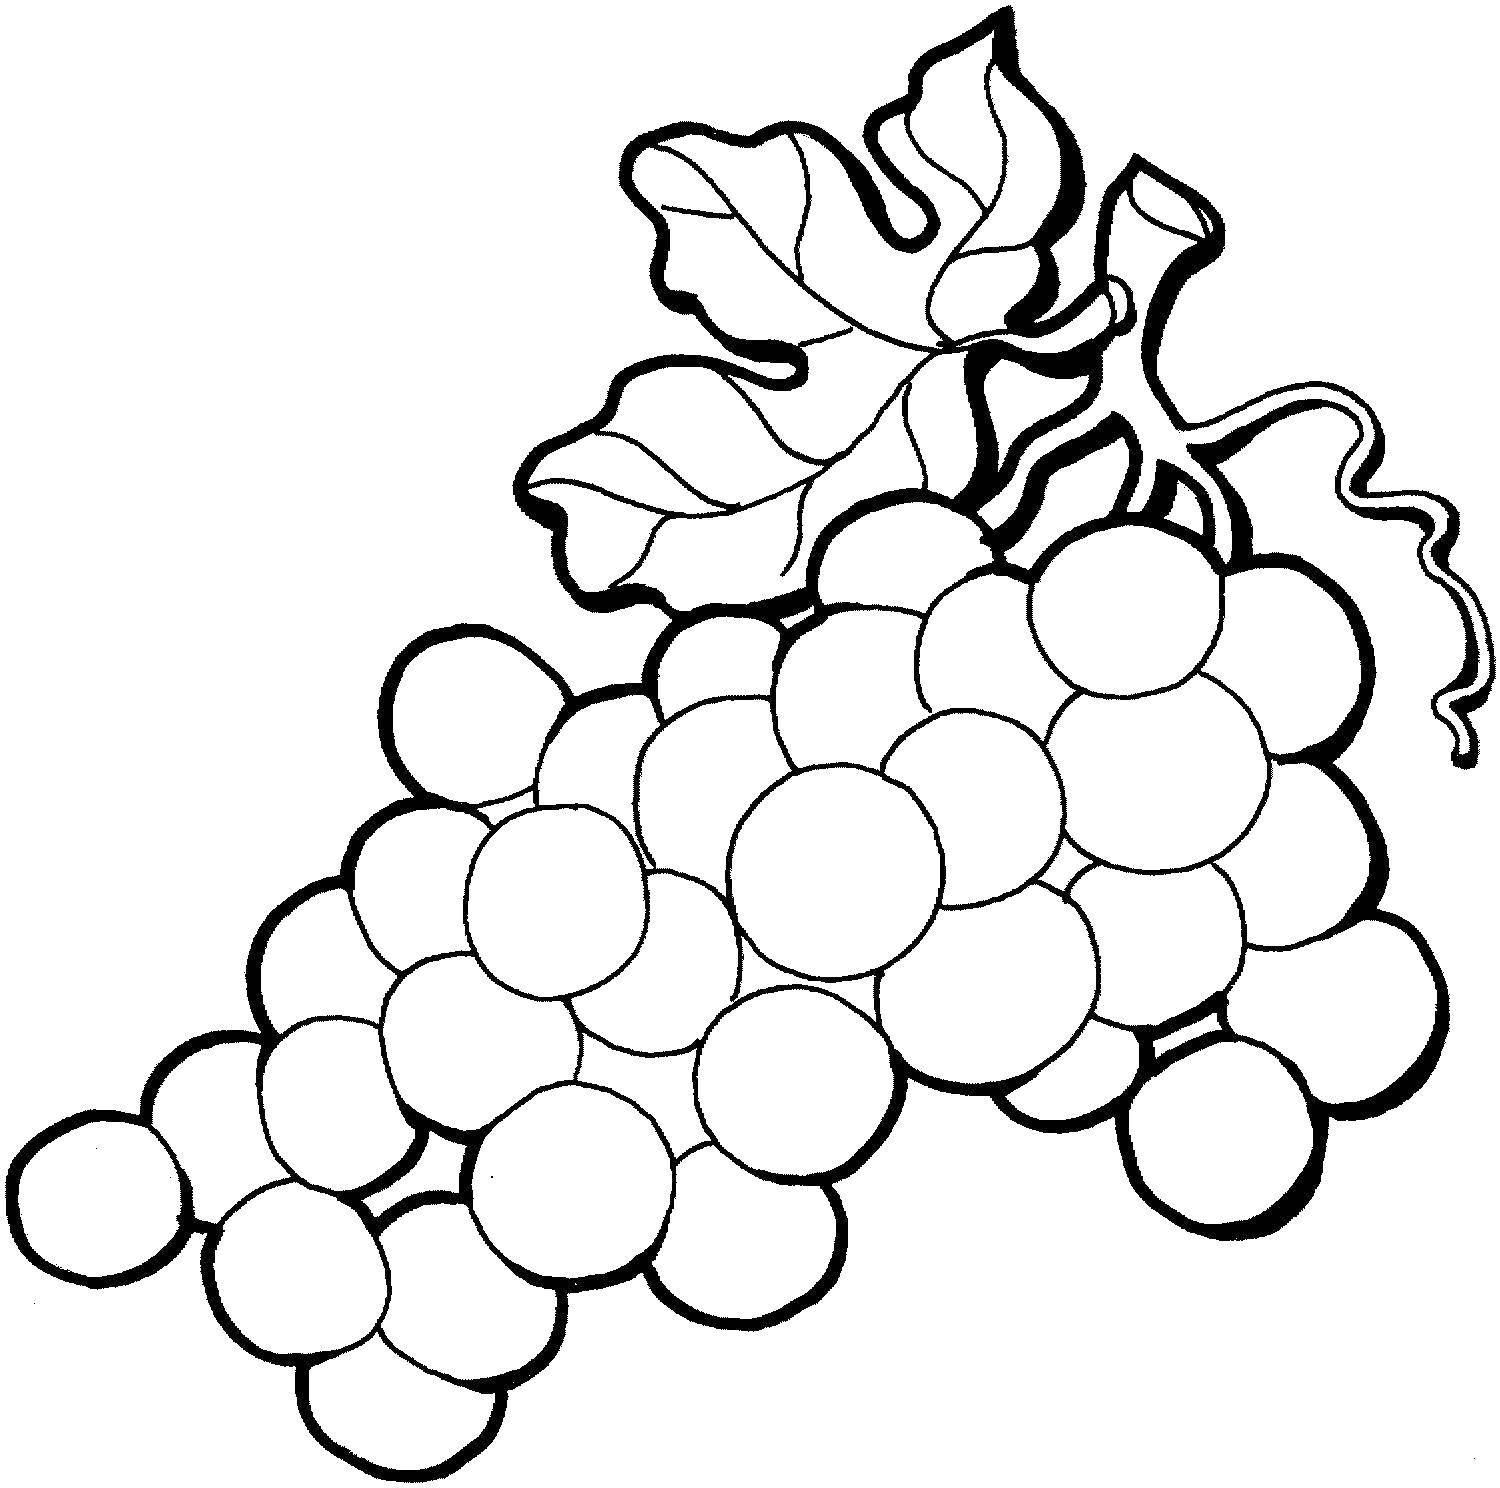 Coloring happy grapes for pre-k